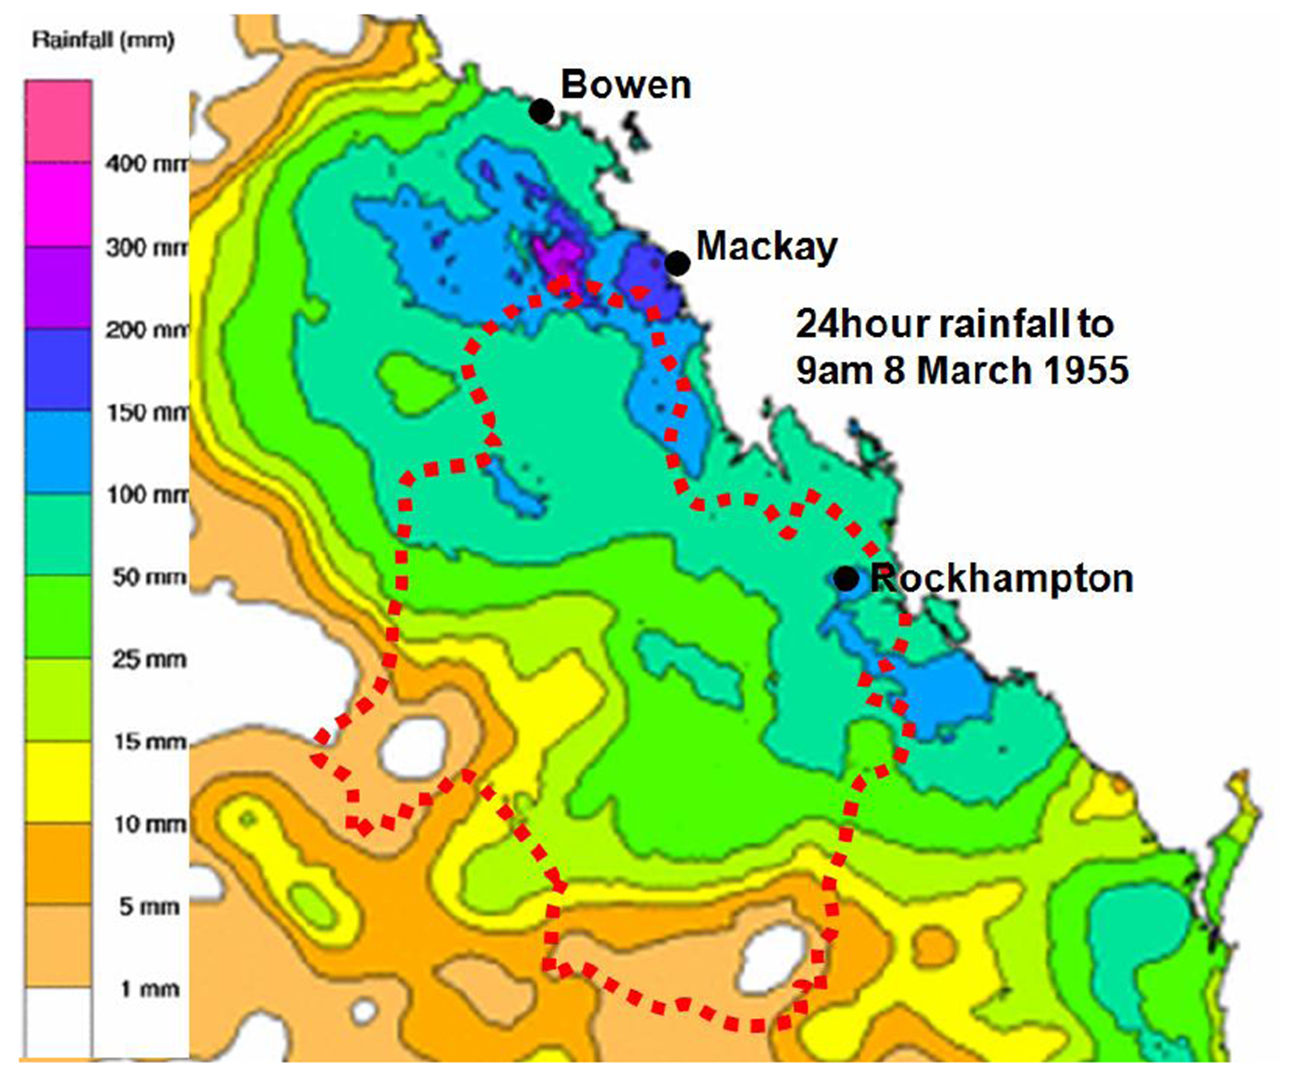 24hour rainfall to 9am 8 March 1955.